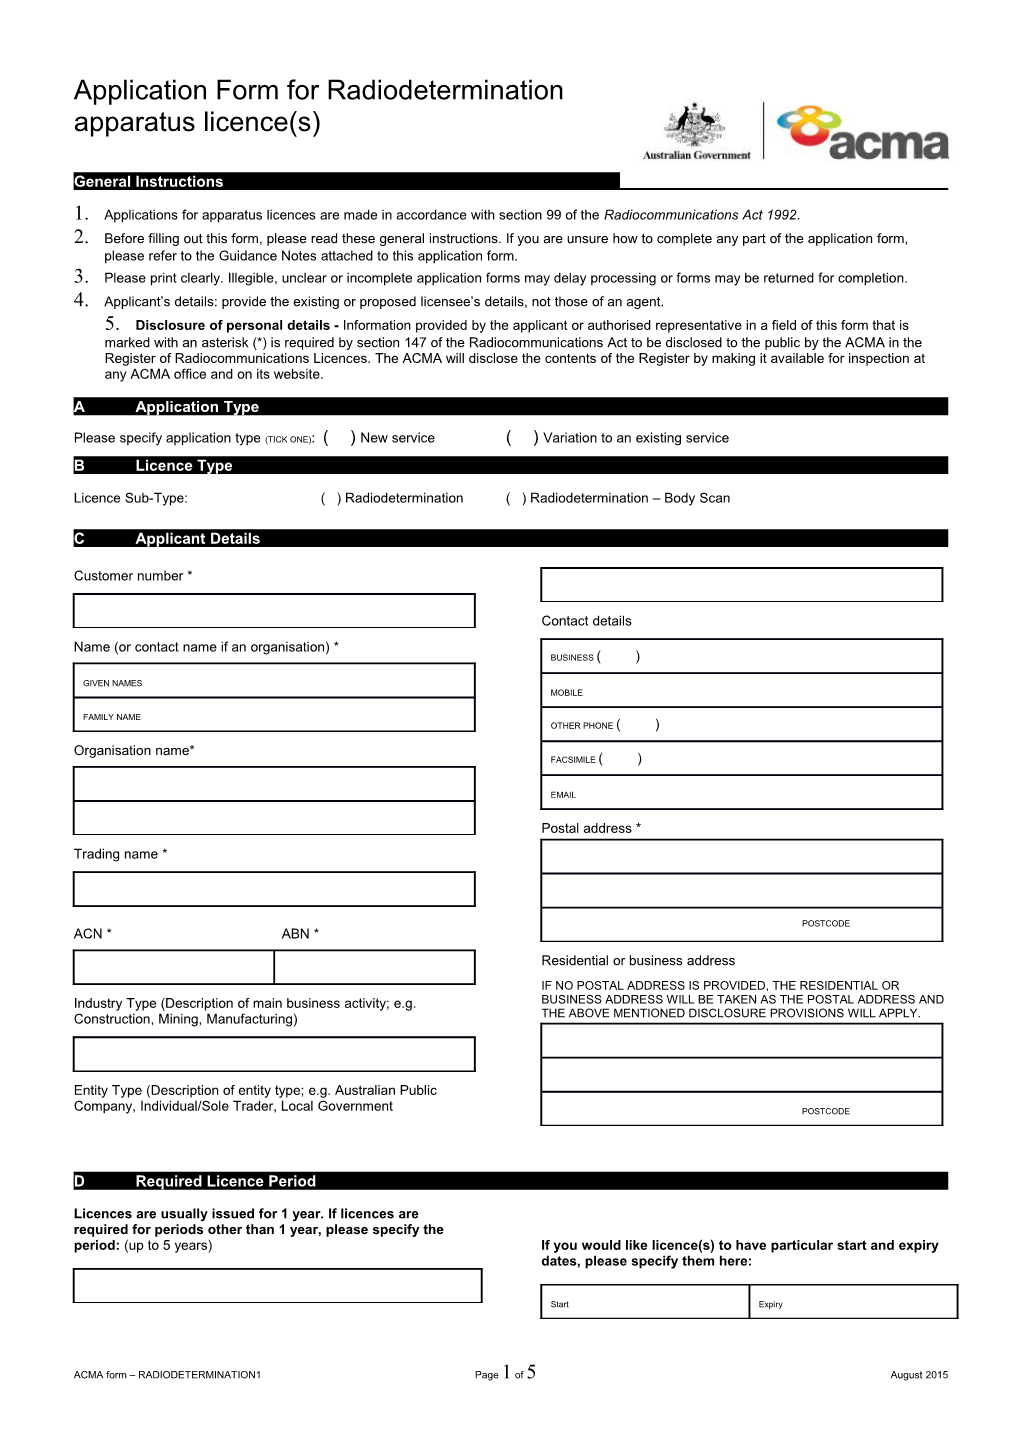 ACMA Form Radiodetermination1page 1 of 4August 2015